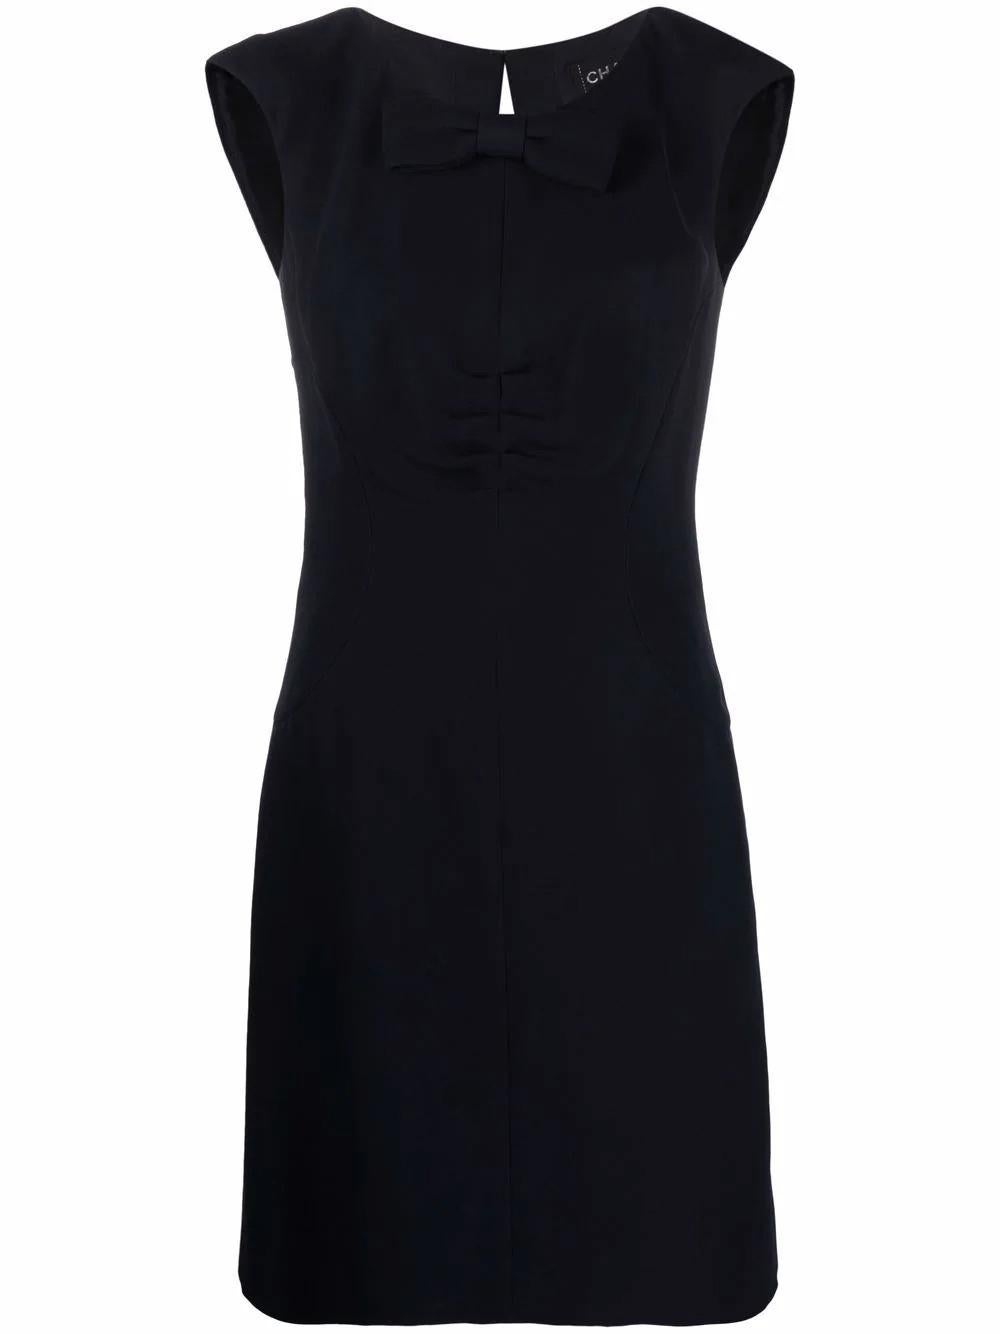 Chanel Navy silk dress featuring a detachable front bow, back neck slit, center back zip opening, with sides bra wires, full silk lining.
Composition: 100% Silk 
Lining: 100% Silk 
Circa 2008
Label size 36fr/ US4/ UK8
In good vintage condition. Made